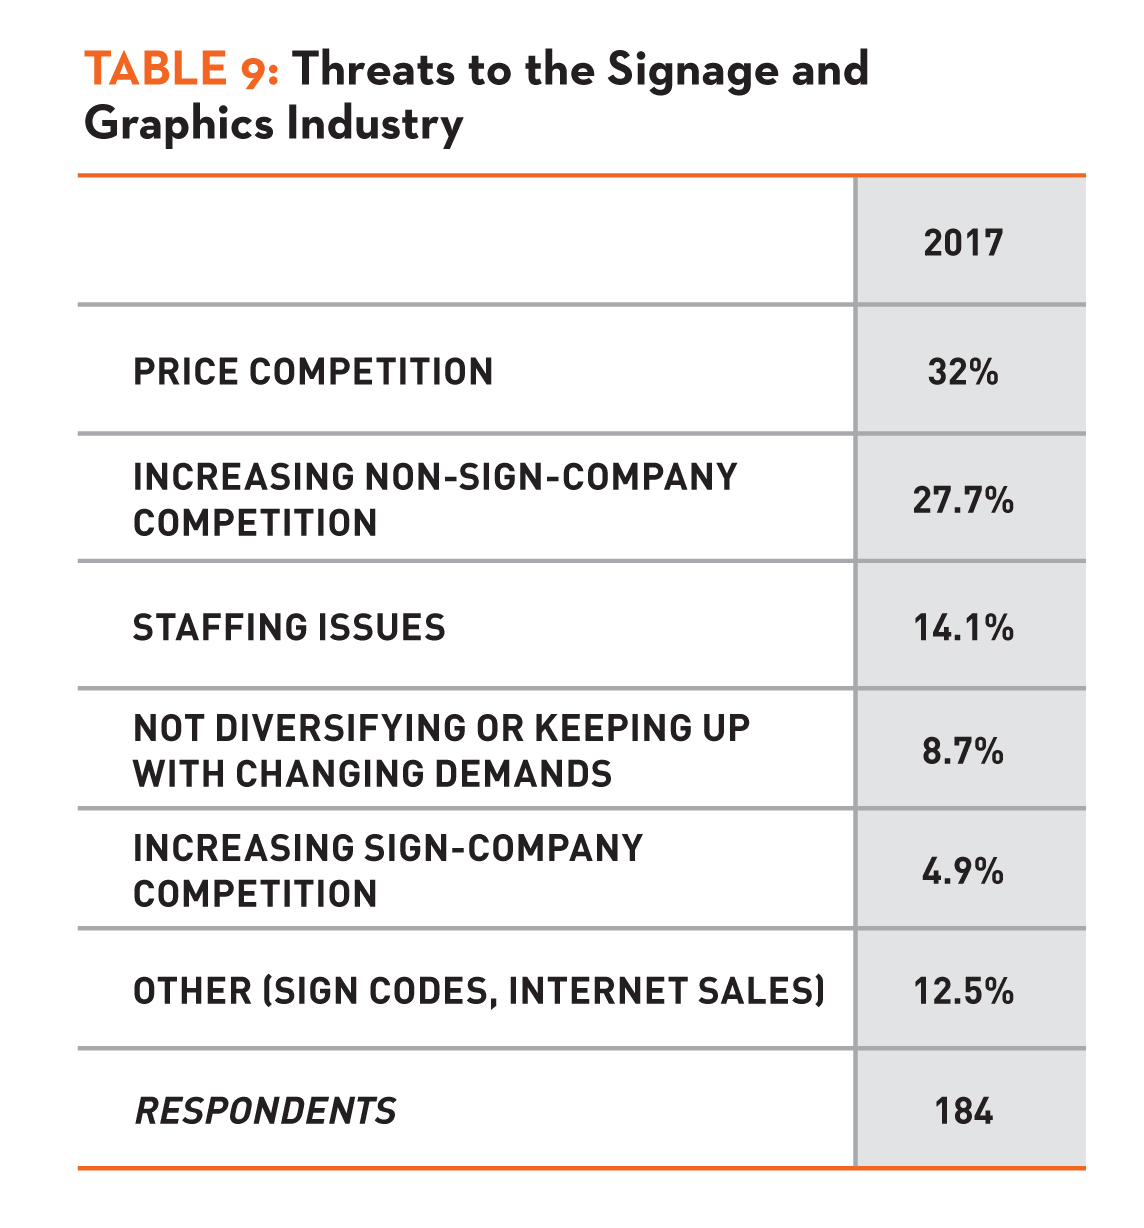 Table 9: Threats to the Signage and Graphics Industry